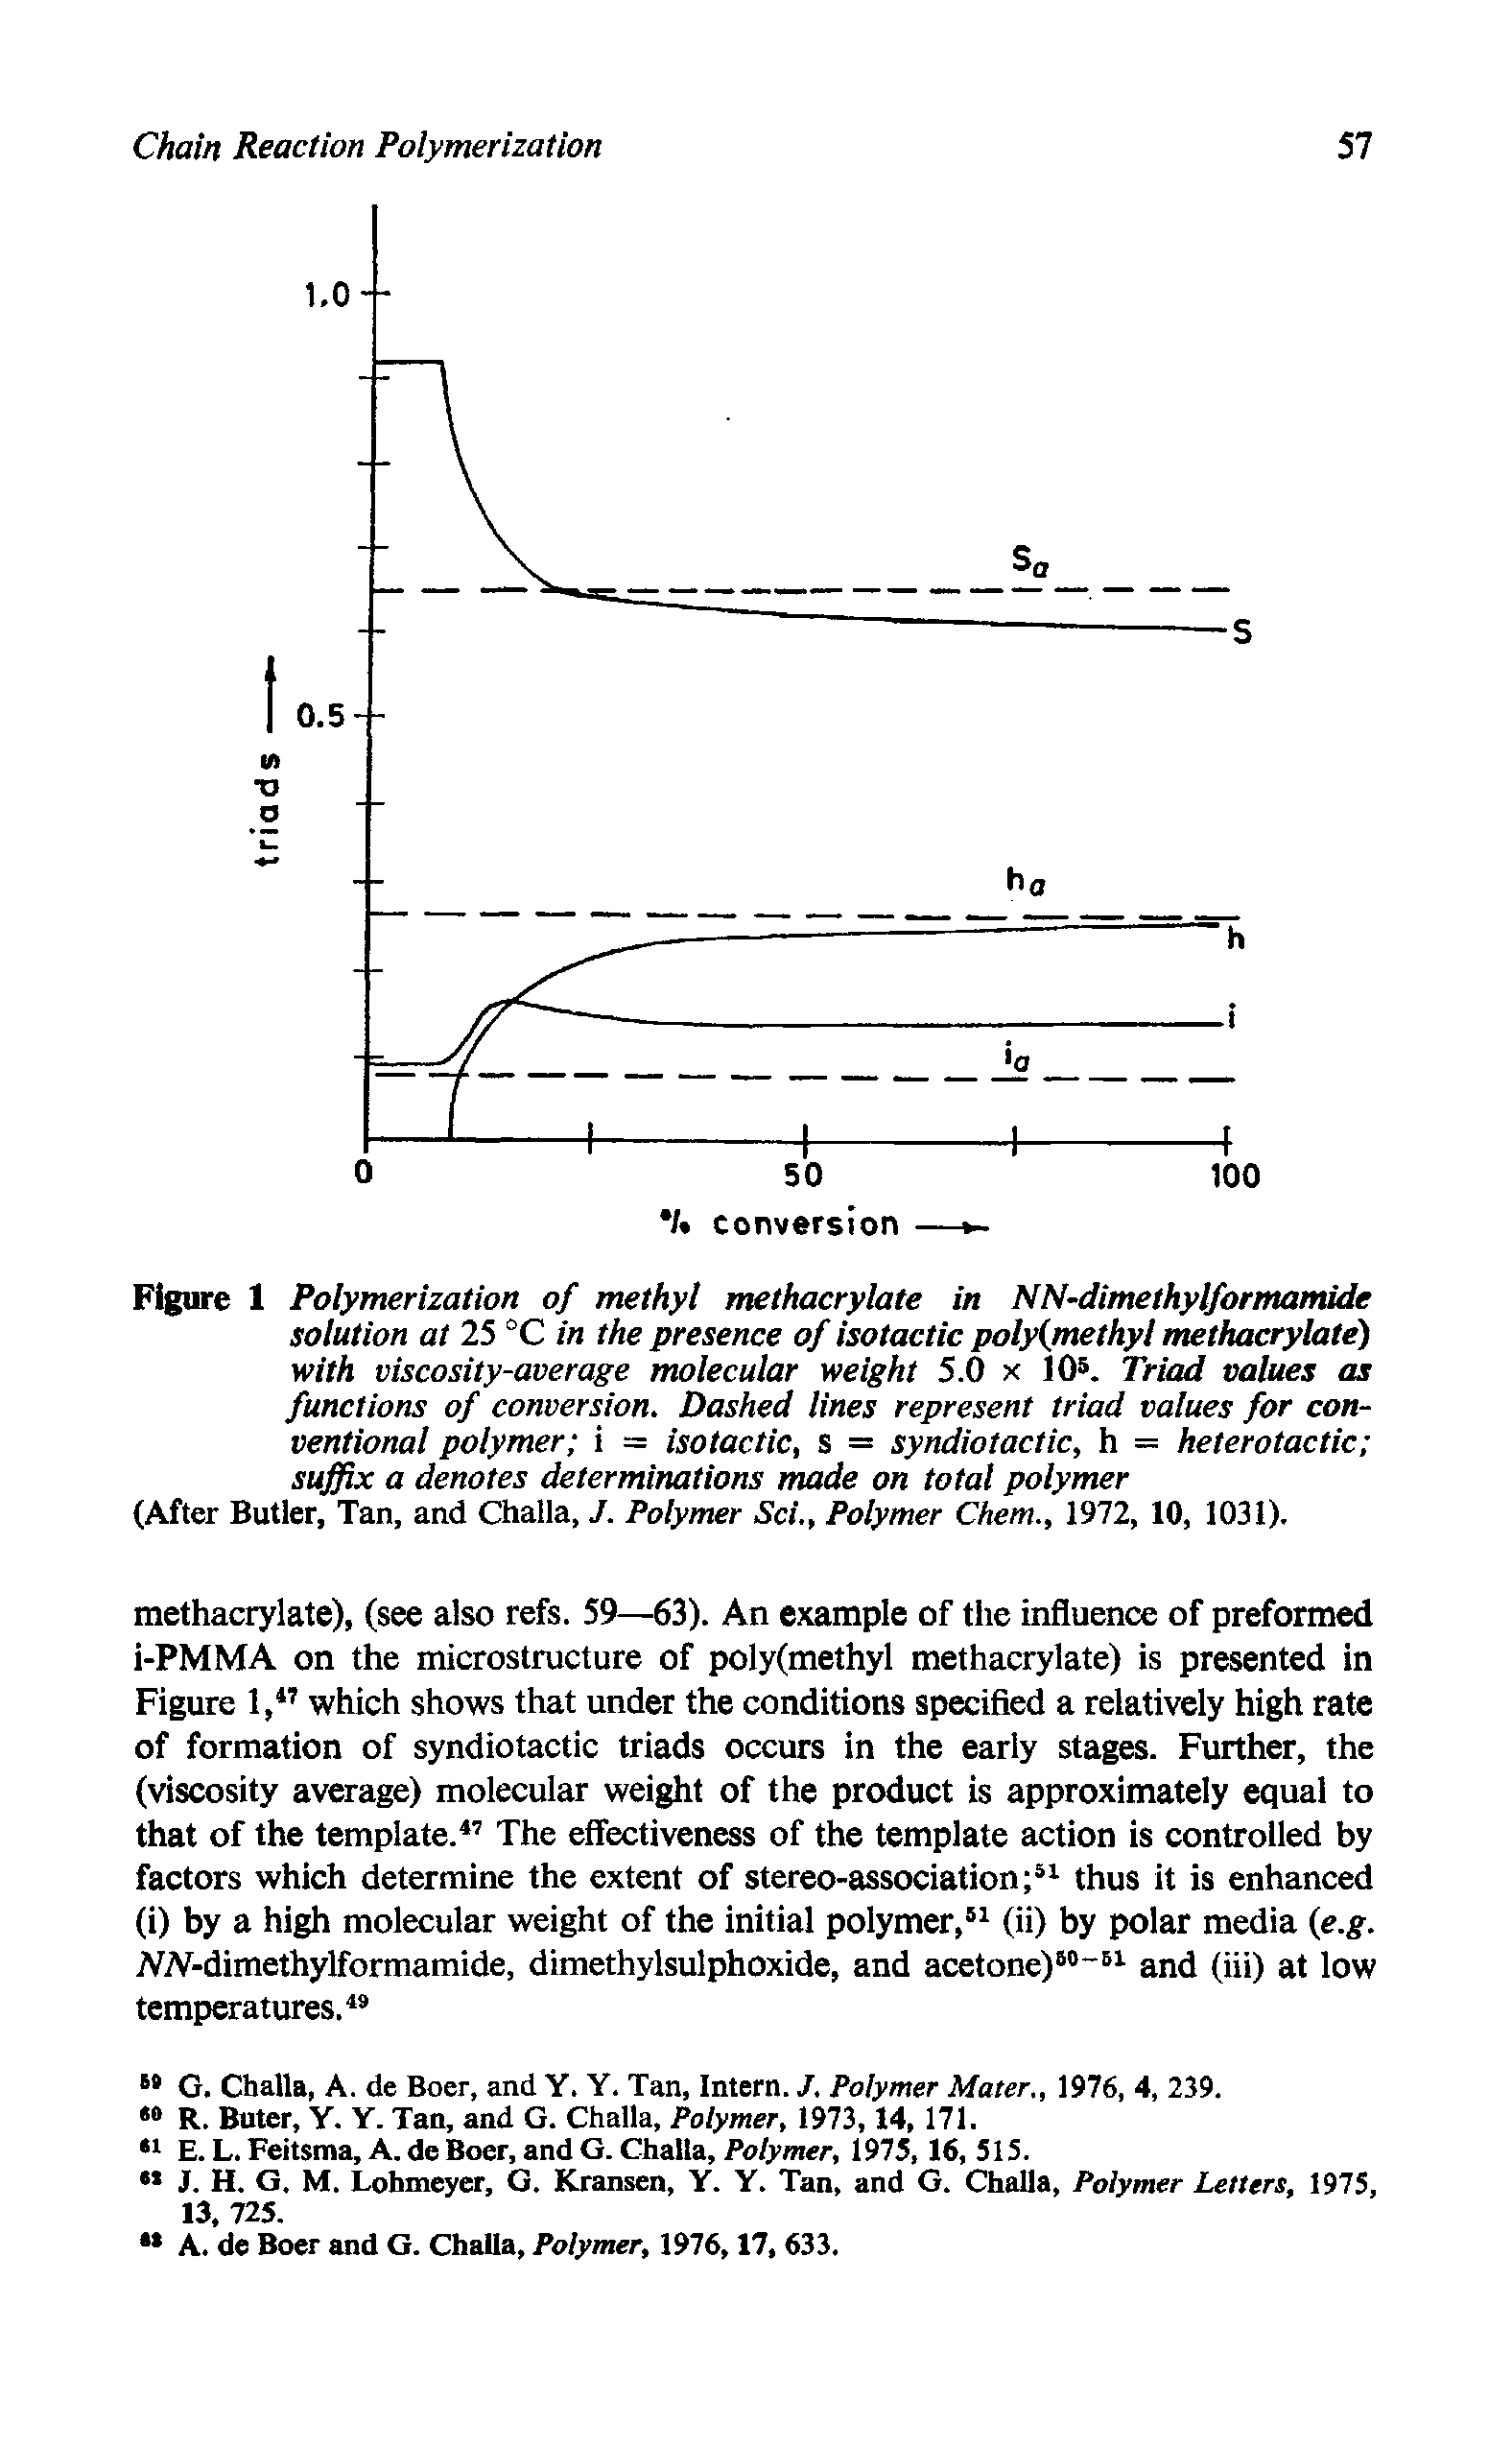 Figure 1 Polymerization of methyl methacrylate in NN dimethylformamide solution at 25 °C in the presence of isotactic polyimethyi methacrylate) with viscosity-average molecular weight 5.0 x 10. Triad values as functions of conversion. Dashed lines represent triad values for conventional polymer i = iso tactic, s = syndiotactic, h = heterotactic suffix a denotes determinations made on total polymer (After Butler, Tan, and Challa, J. Polymer Sci., Polymer Chem., 1972, 10, 1031).